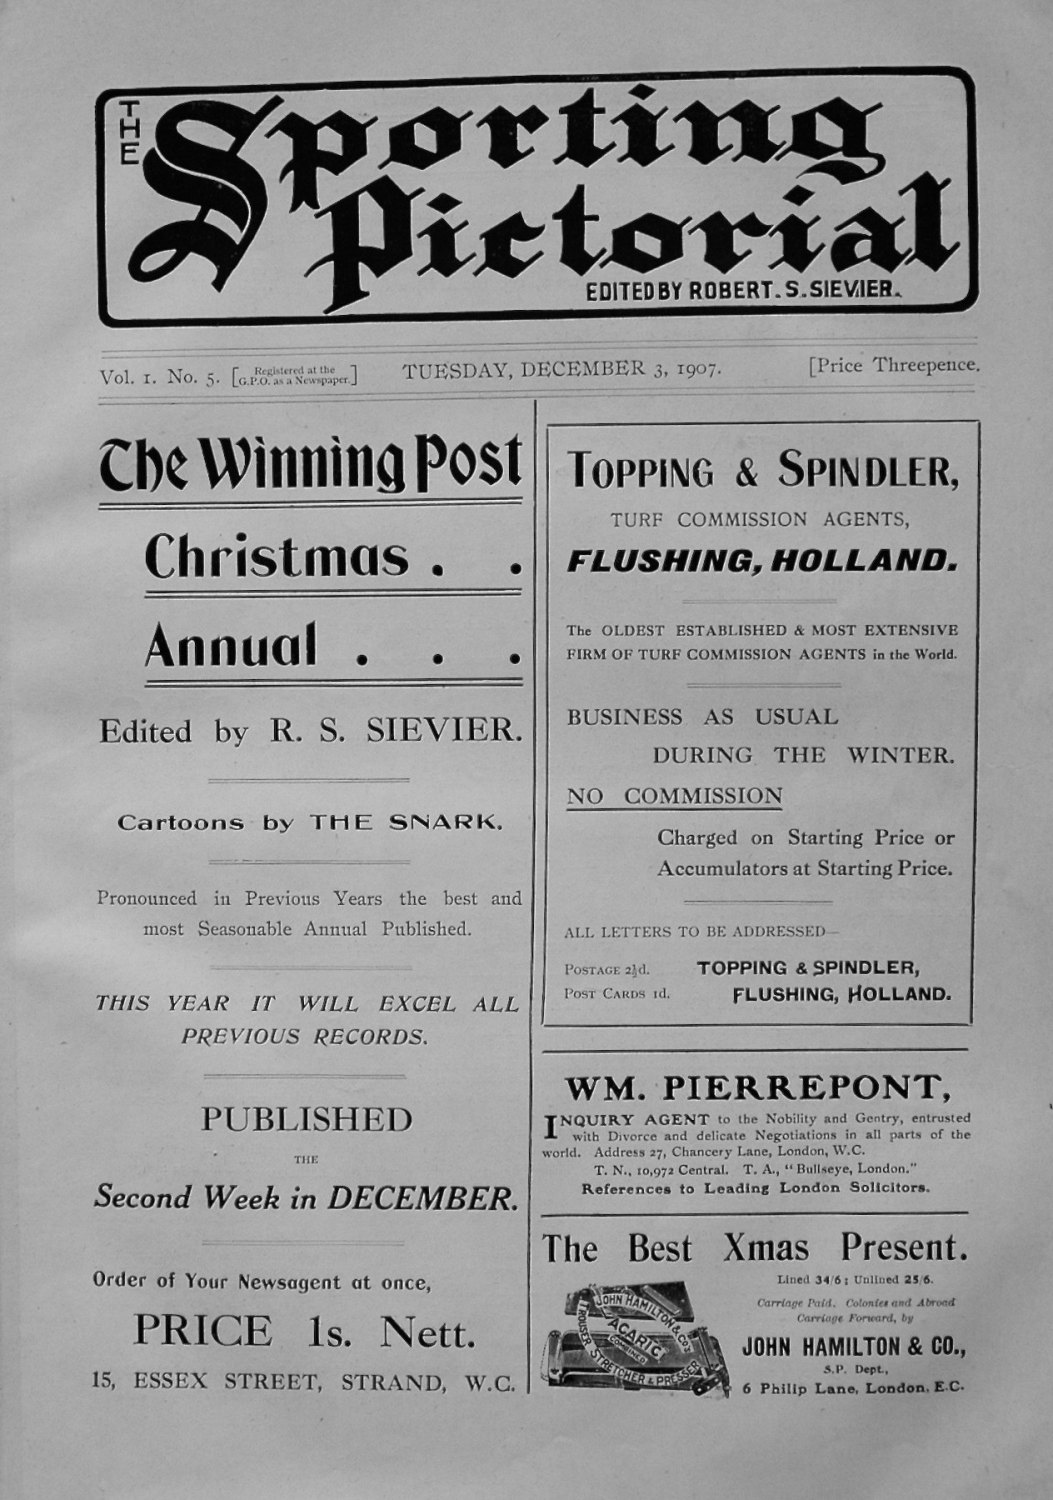 Sporting Pictorial. No. 5. December 3rd 1907.